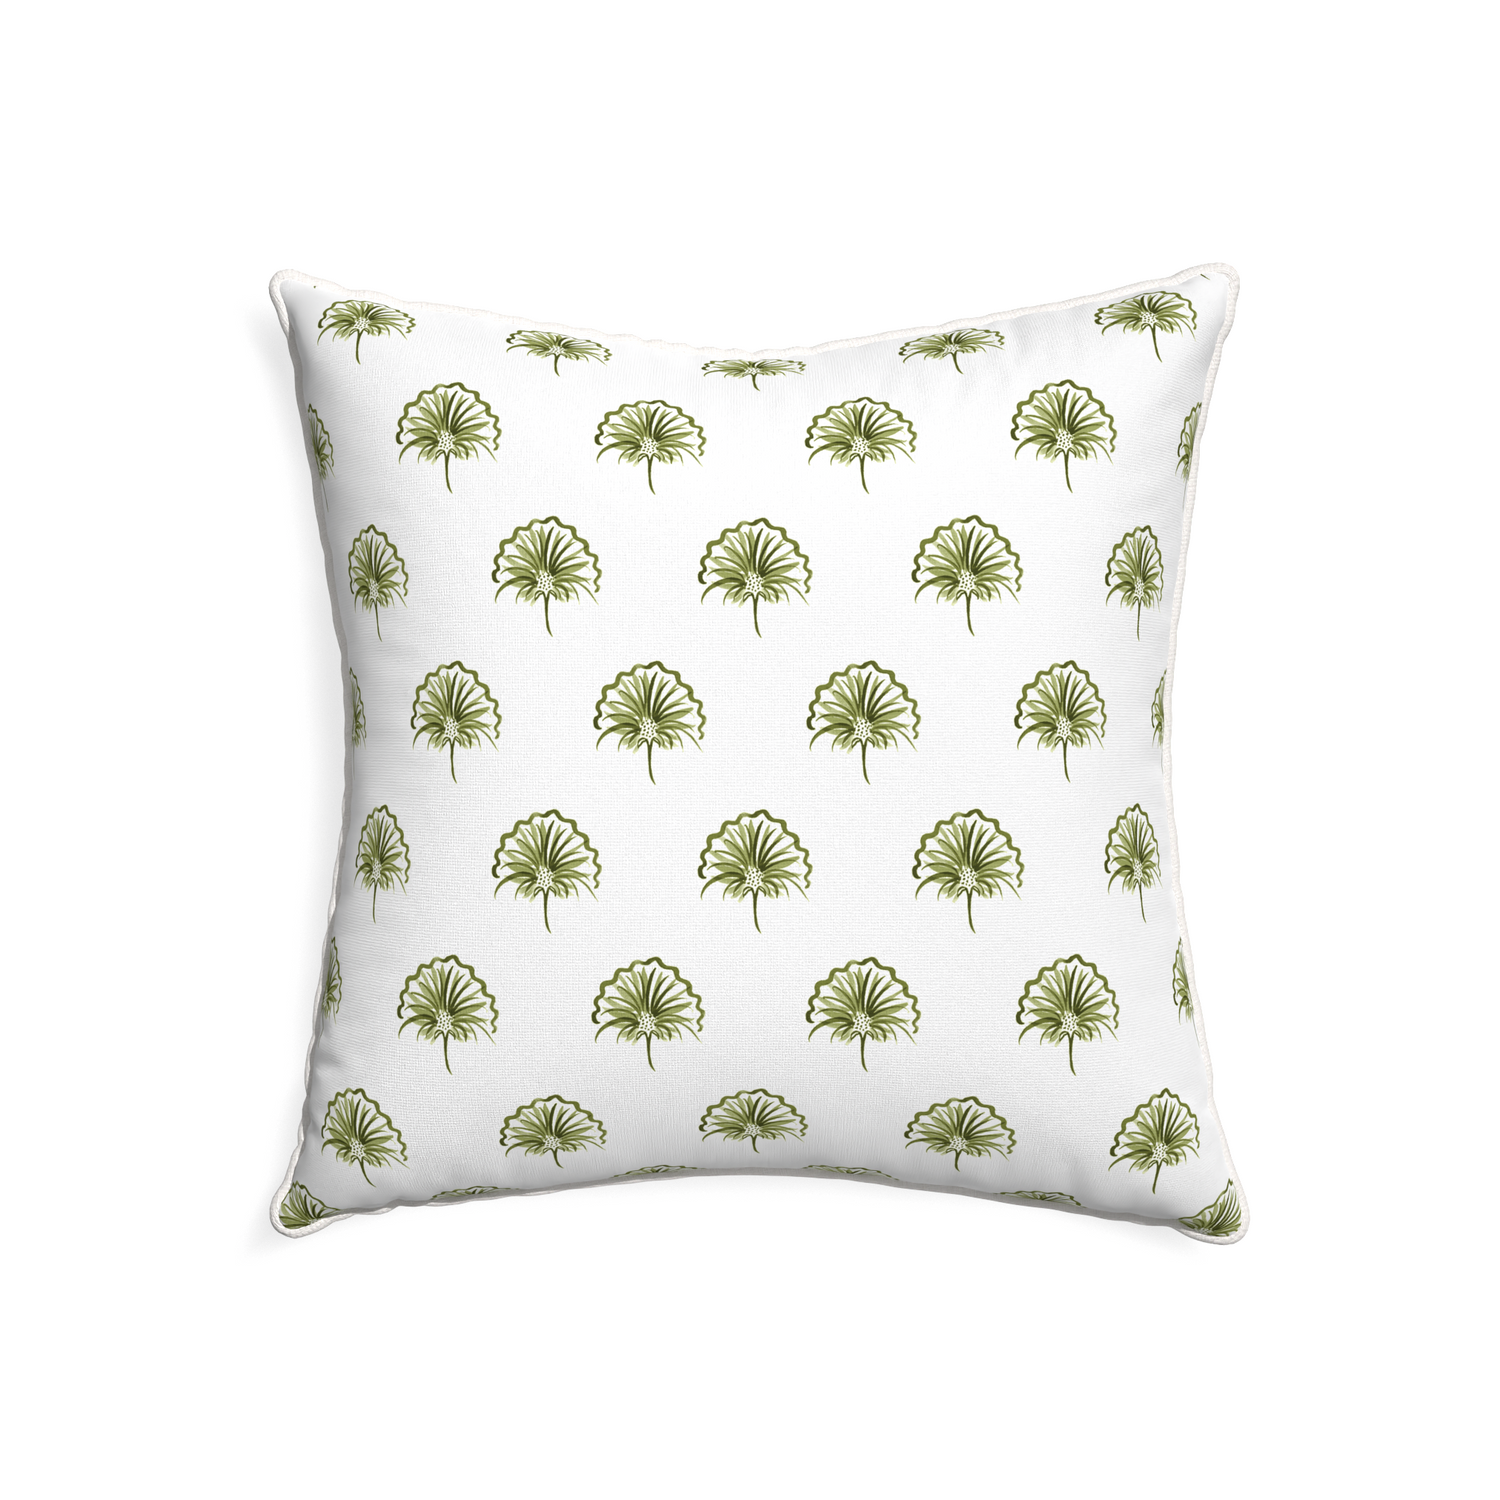 22-square penelope moss custom green floralpillow with snow piping on white background